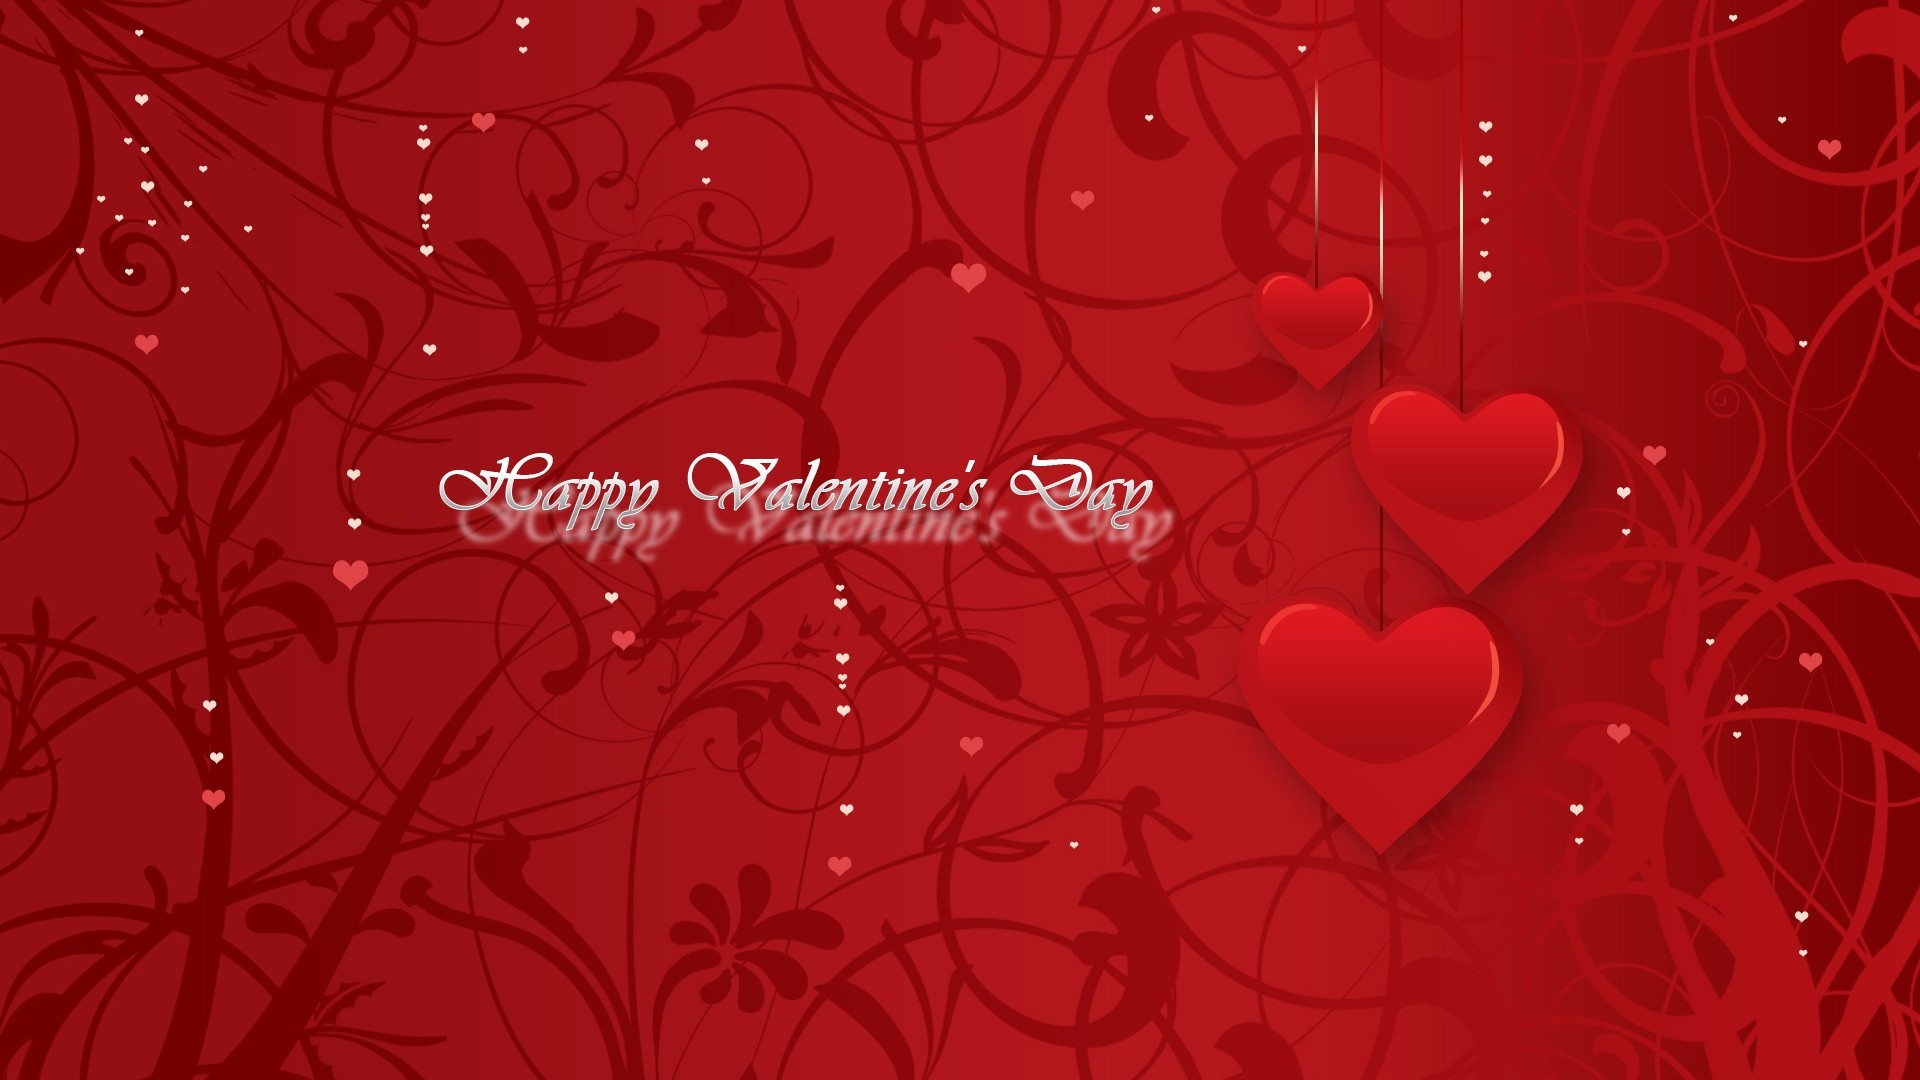 Happy Valentines Day Image HD Wallpaper Of Love